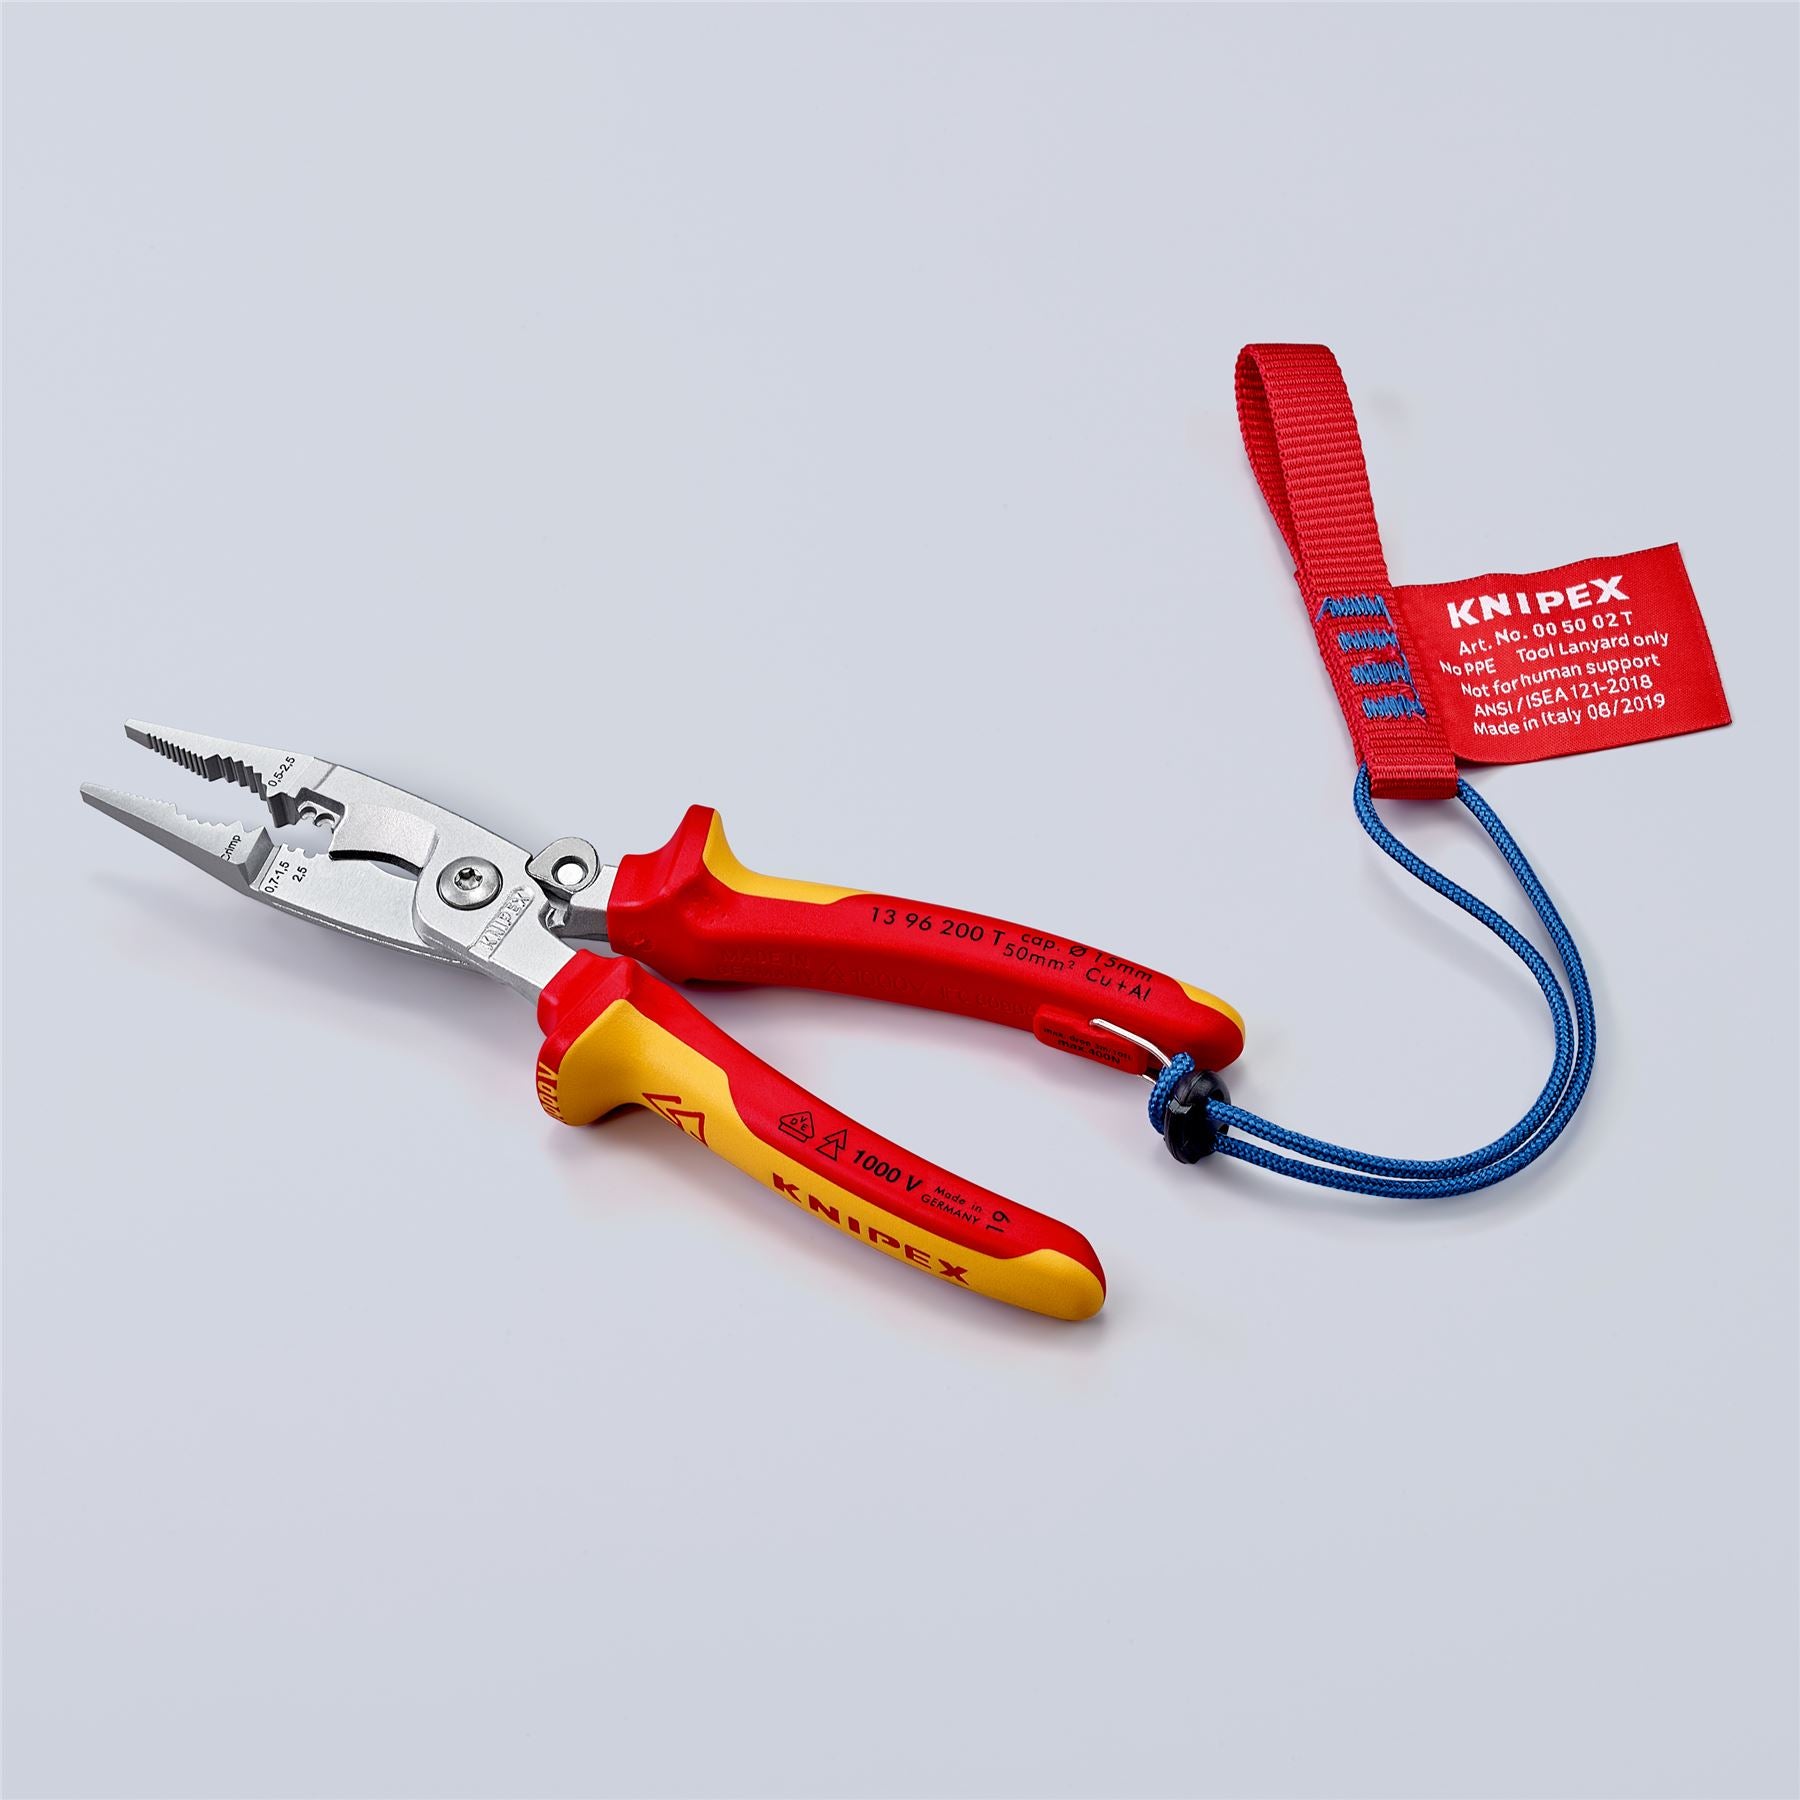 KNIPEX Pliers for Electrical Installation 200mm VDE Chrome Multi Component Grips 13 96 200